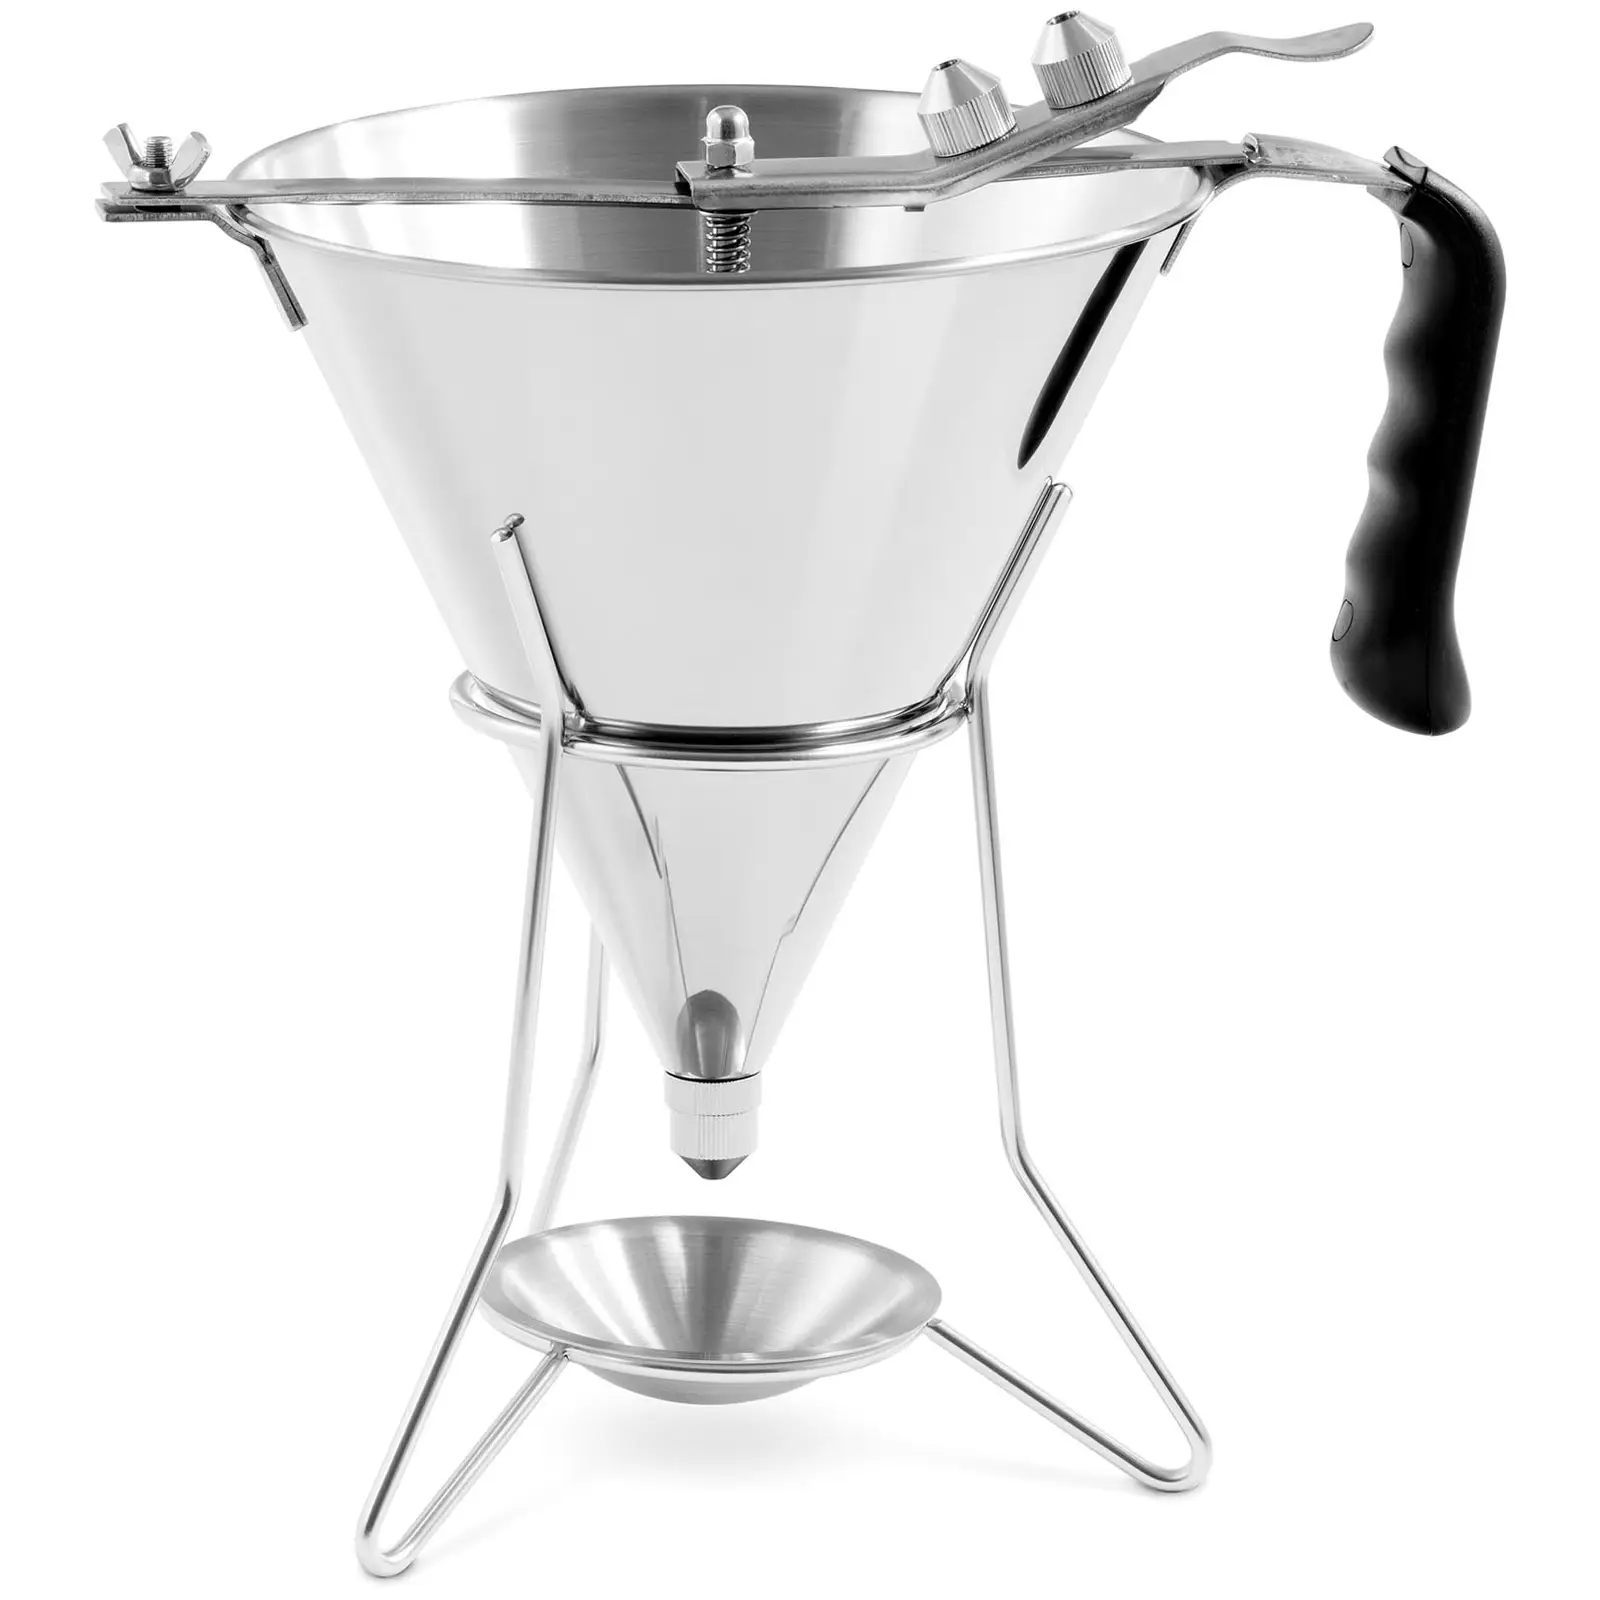 Filling funnel - 1.8 L - stainless steel - 3 filling tips - stand with drip tray